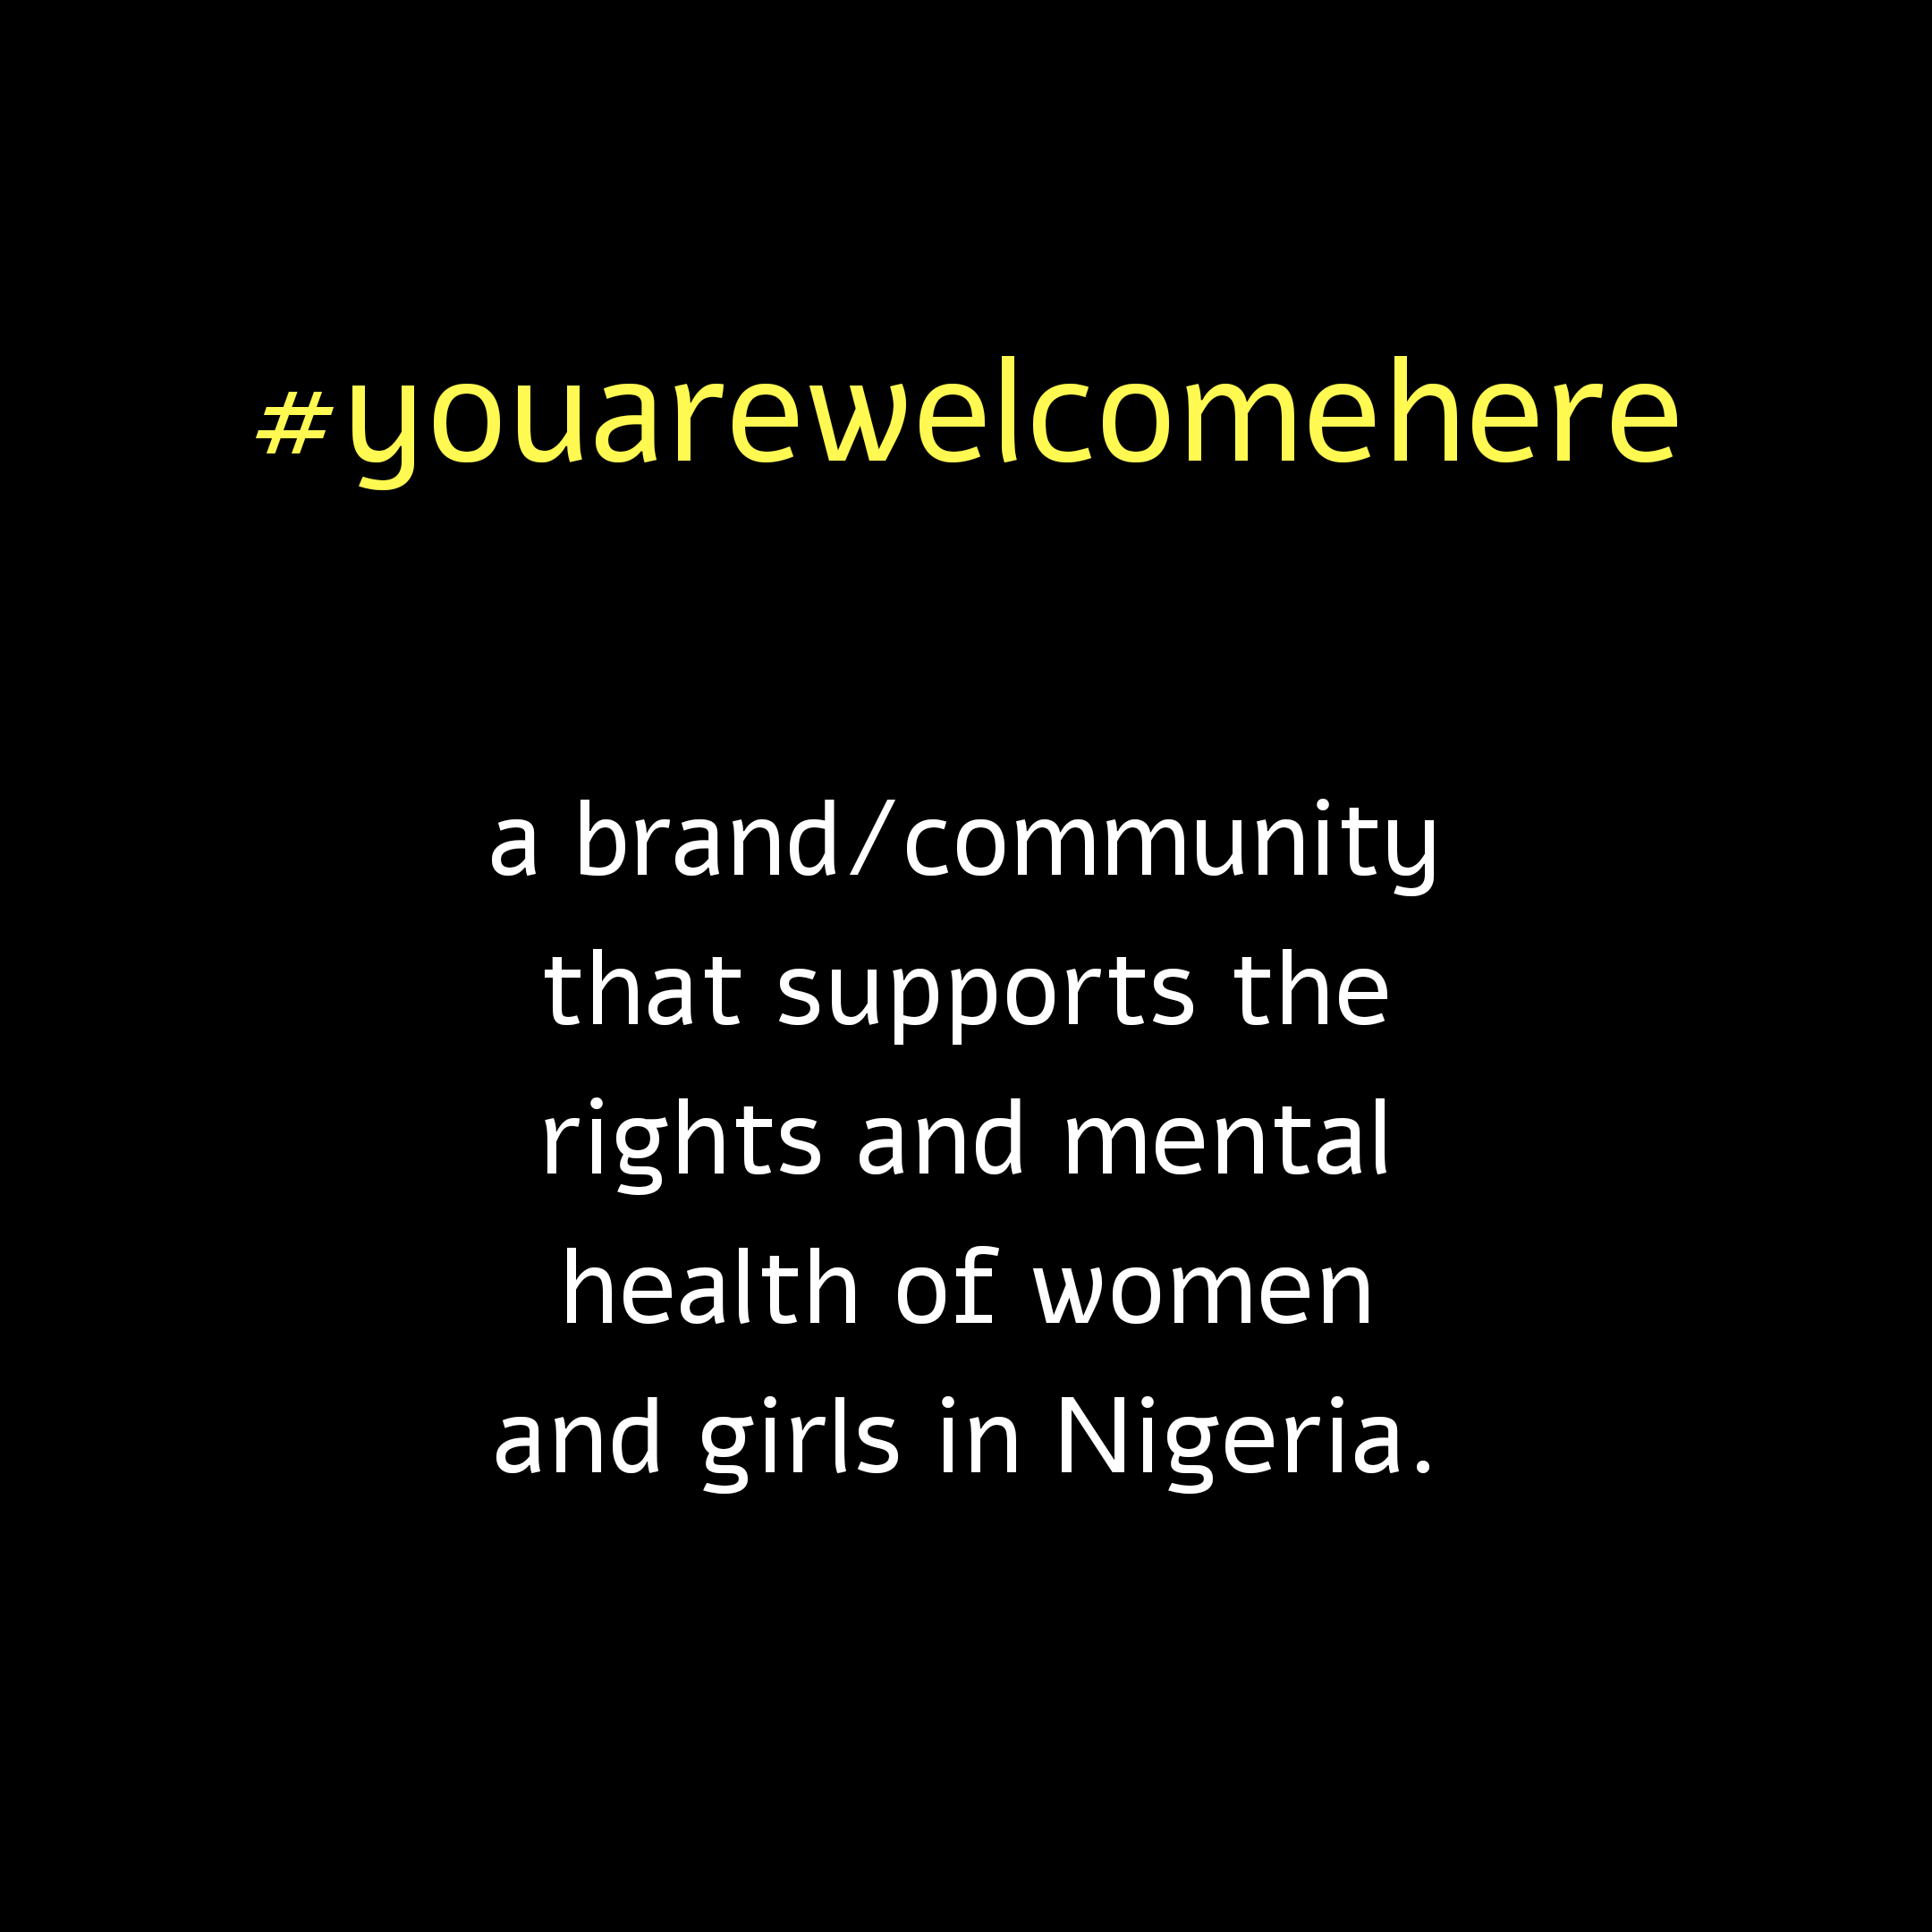 #youarewelcomehere Nigeria is a branch of OVI organization that focuses on supporting the mental wellbeing of women and girls in Nigeria.